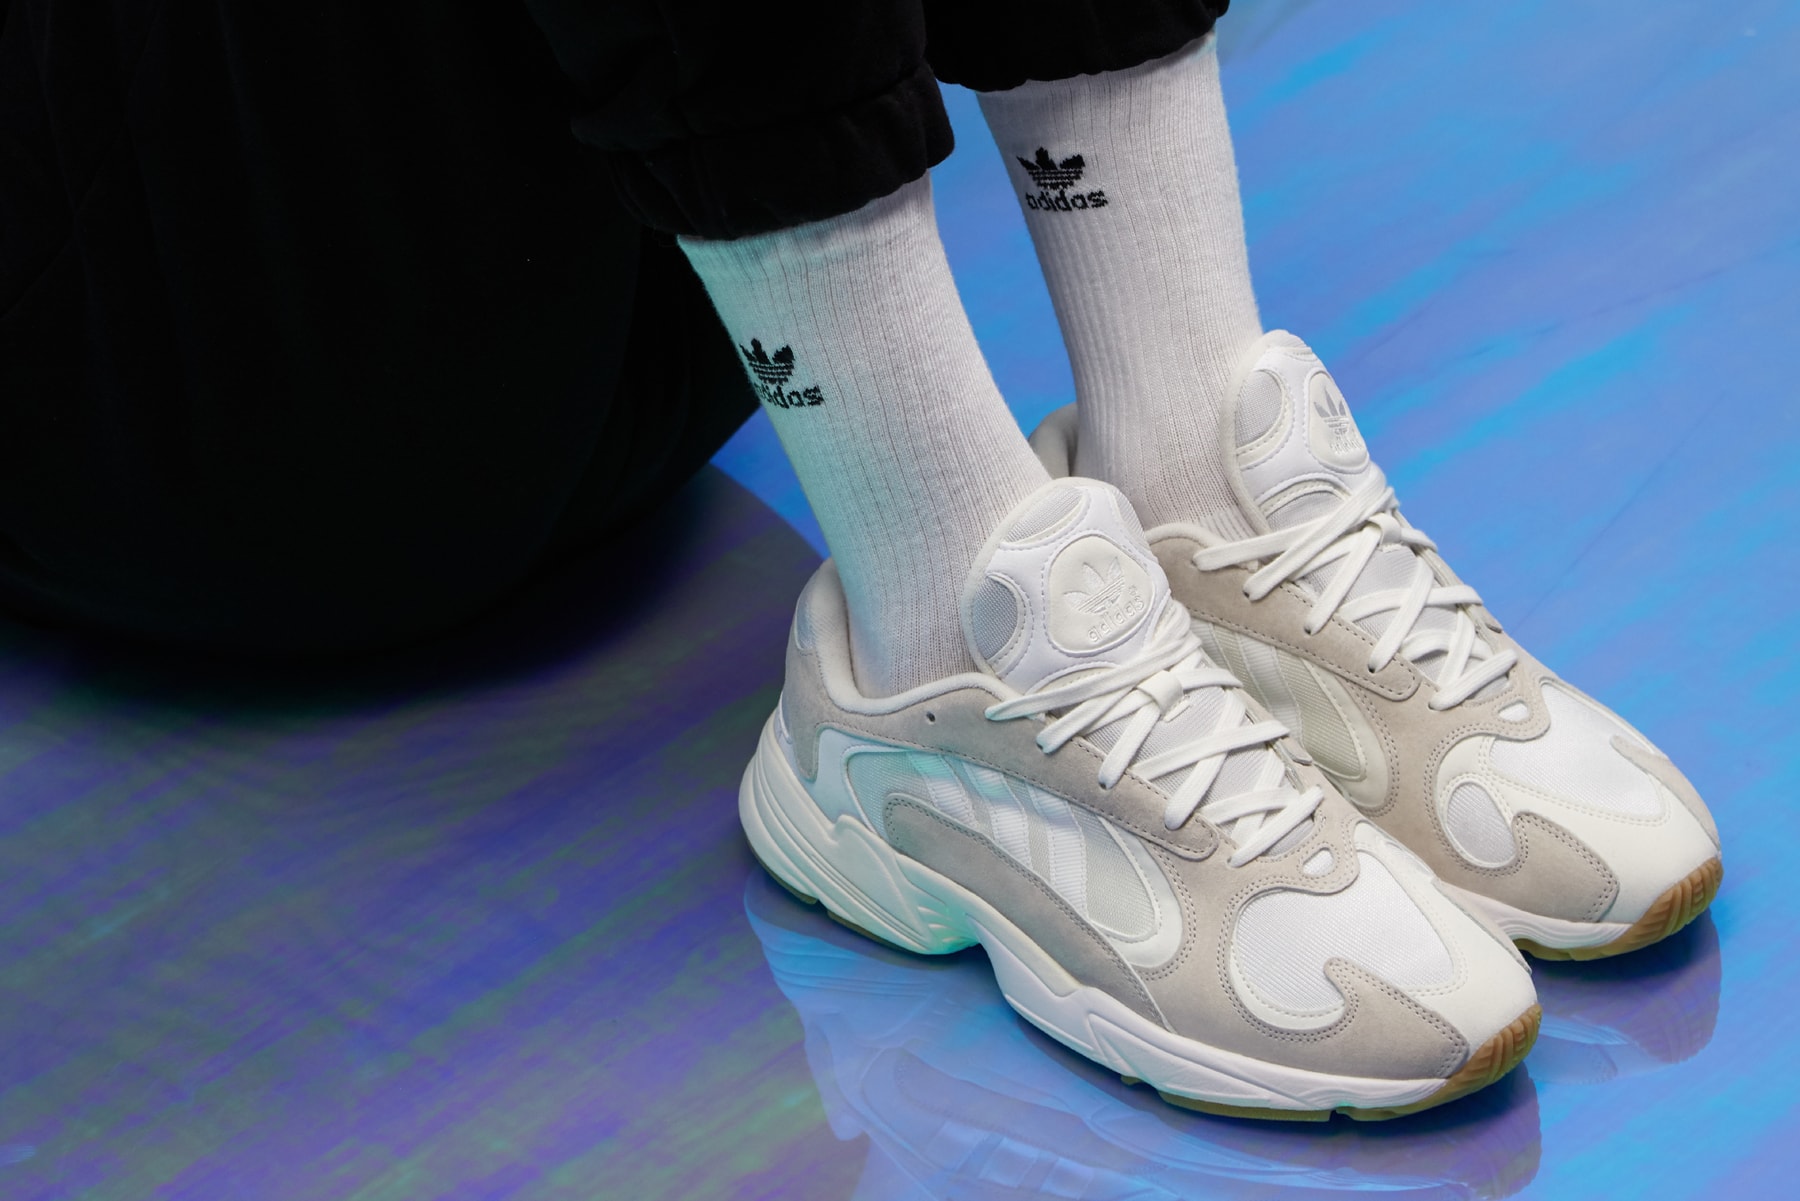 wardrobe nyc x adidas yung 1 one collaboration sneaker colorway exclusive white cream gum sole suede leather exclusive pre order june 18 2018 july drop release date info launch